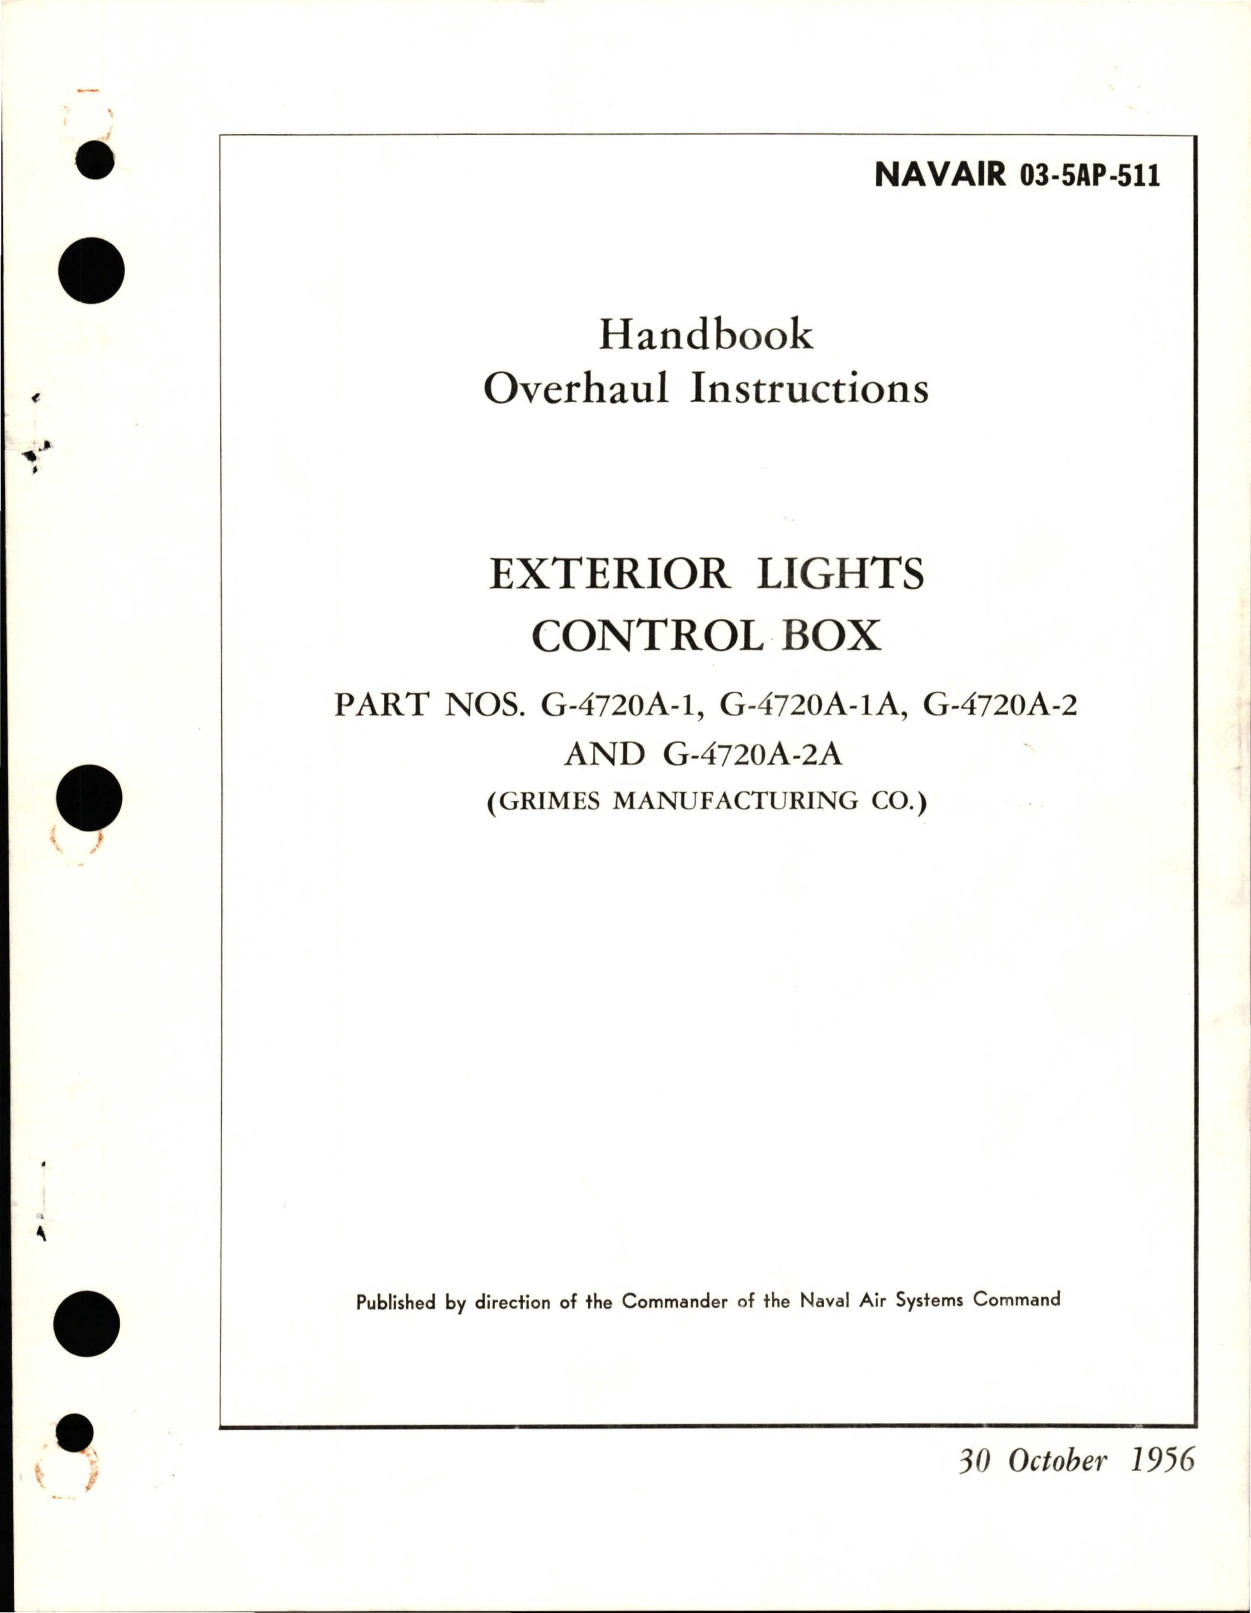 Sample page 1 from AirCorps Library document: Overhaul Instructions for Exterior Lights Control Box 